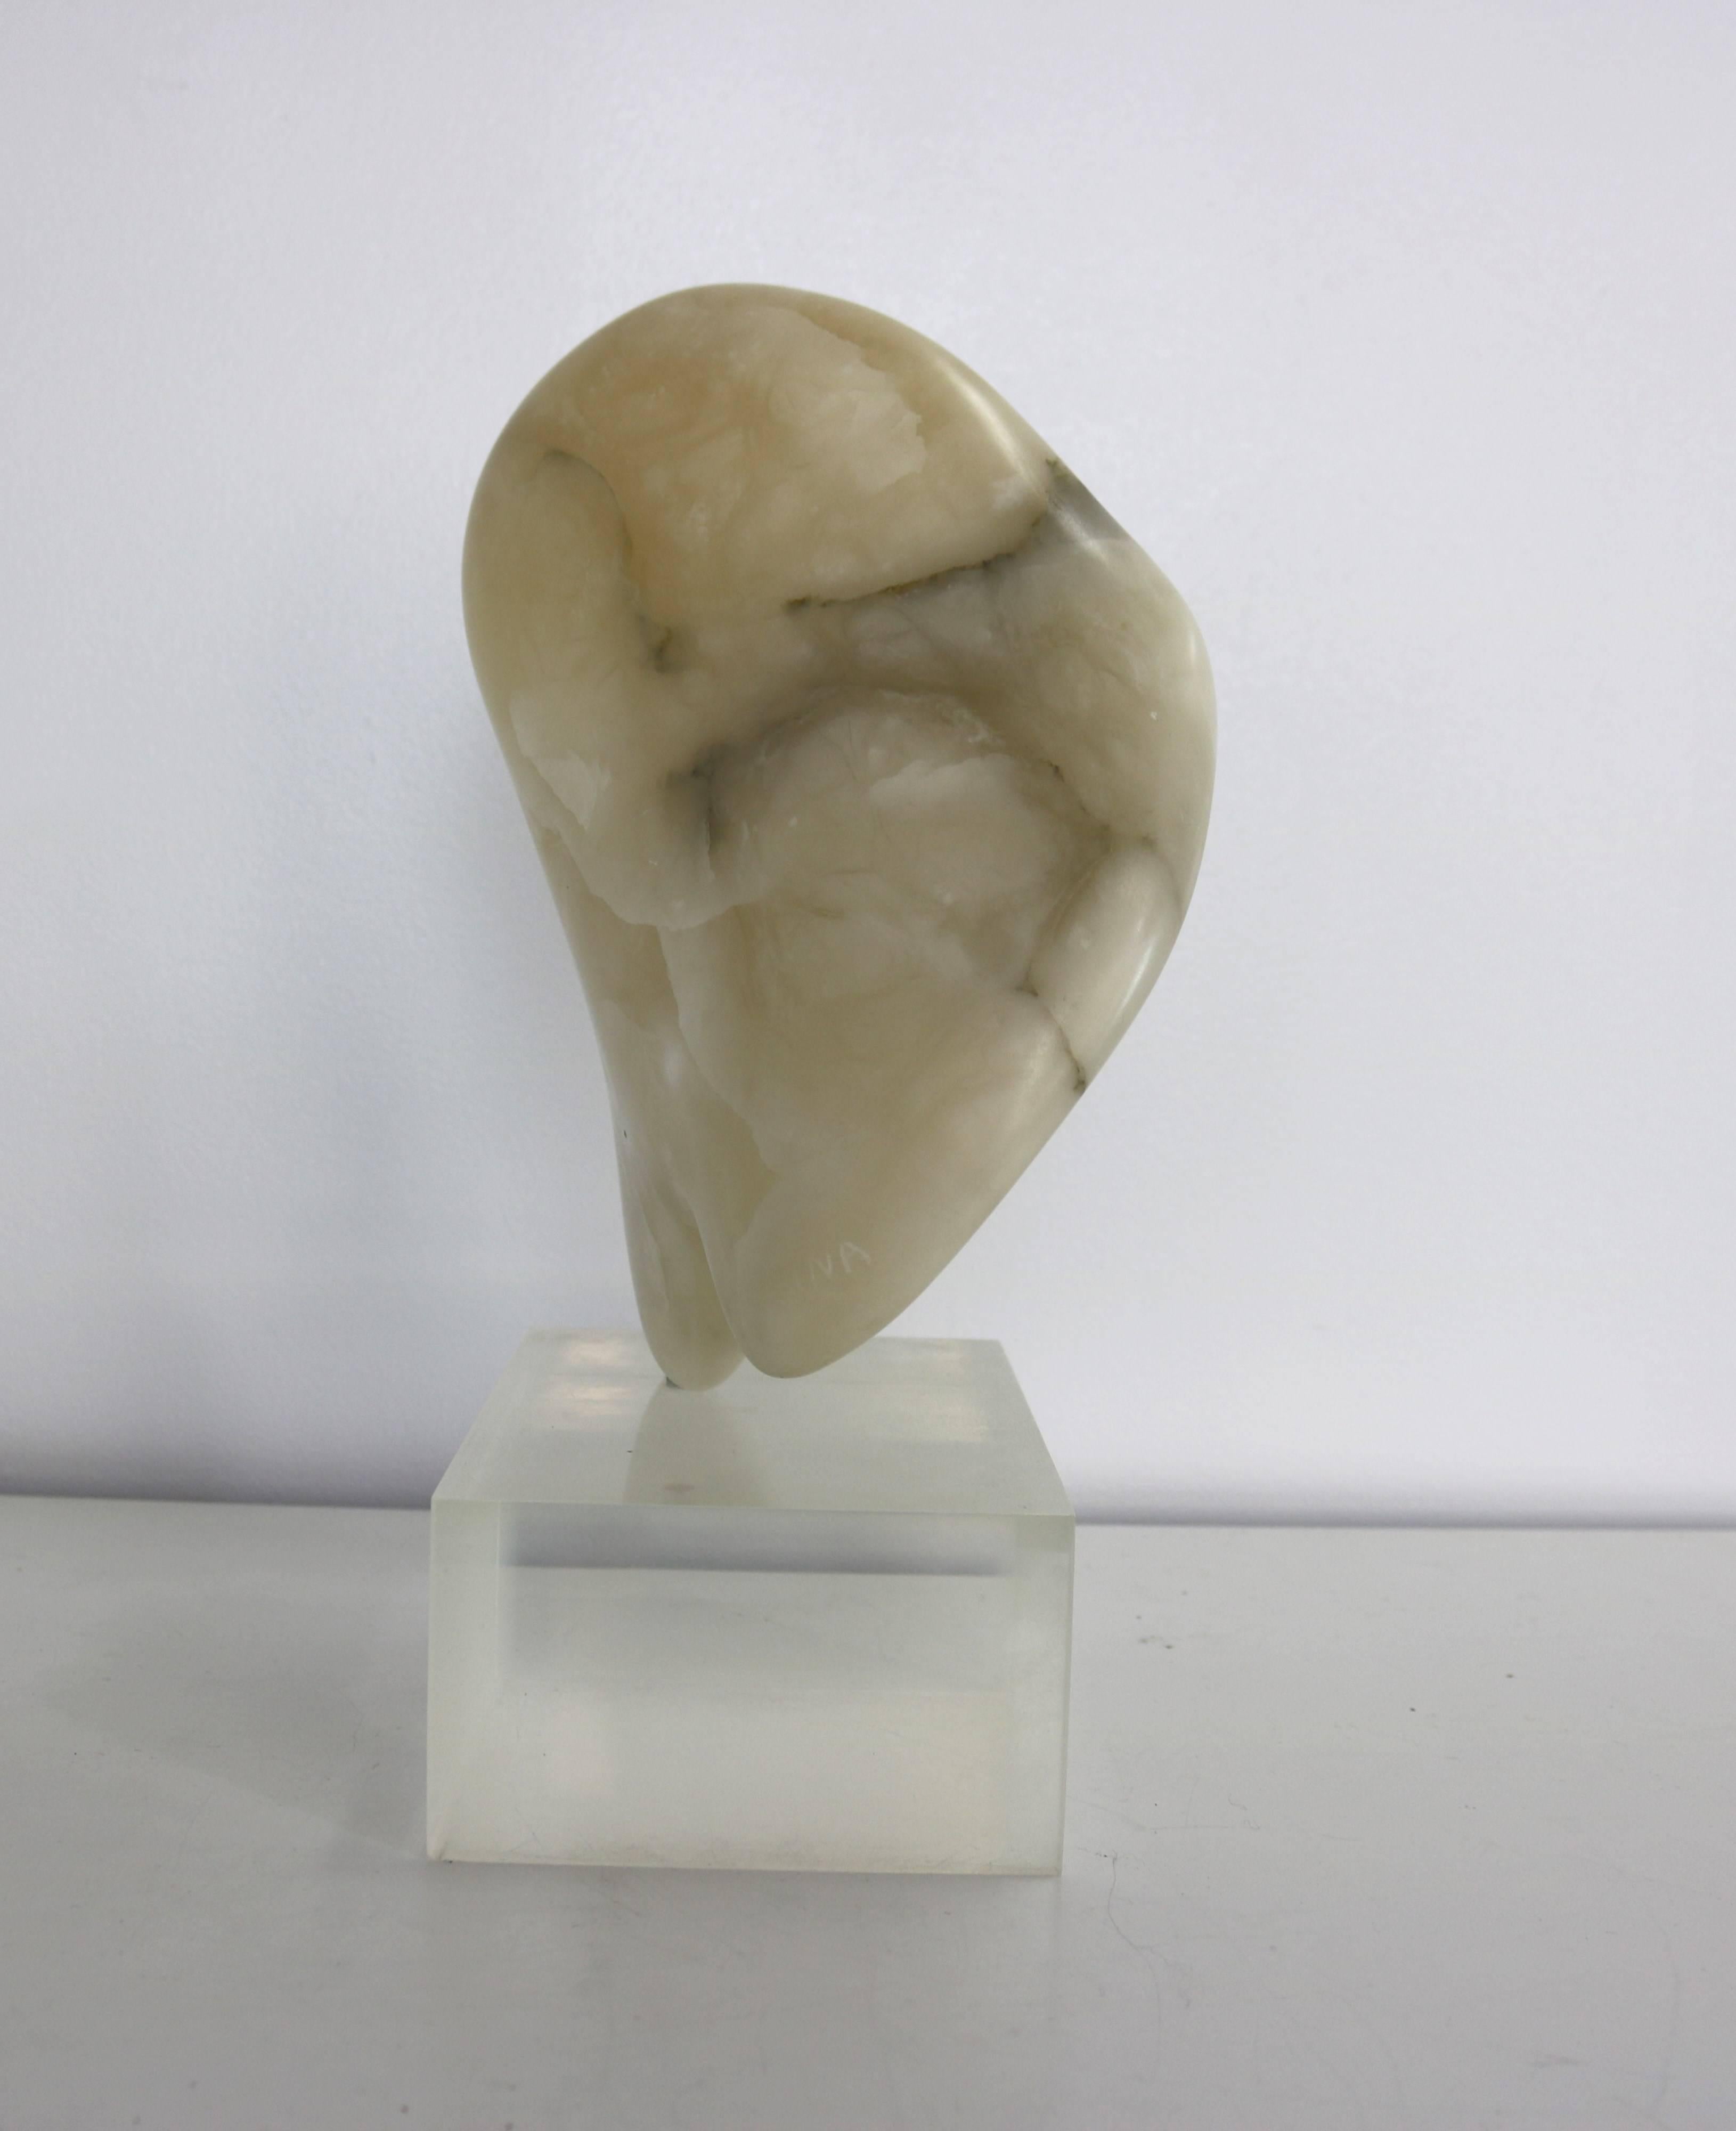 Reminiscent of the work of Jean Art, this lovely biomorphic sculpture is perches atop a Lucite base. Signed.